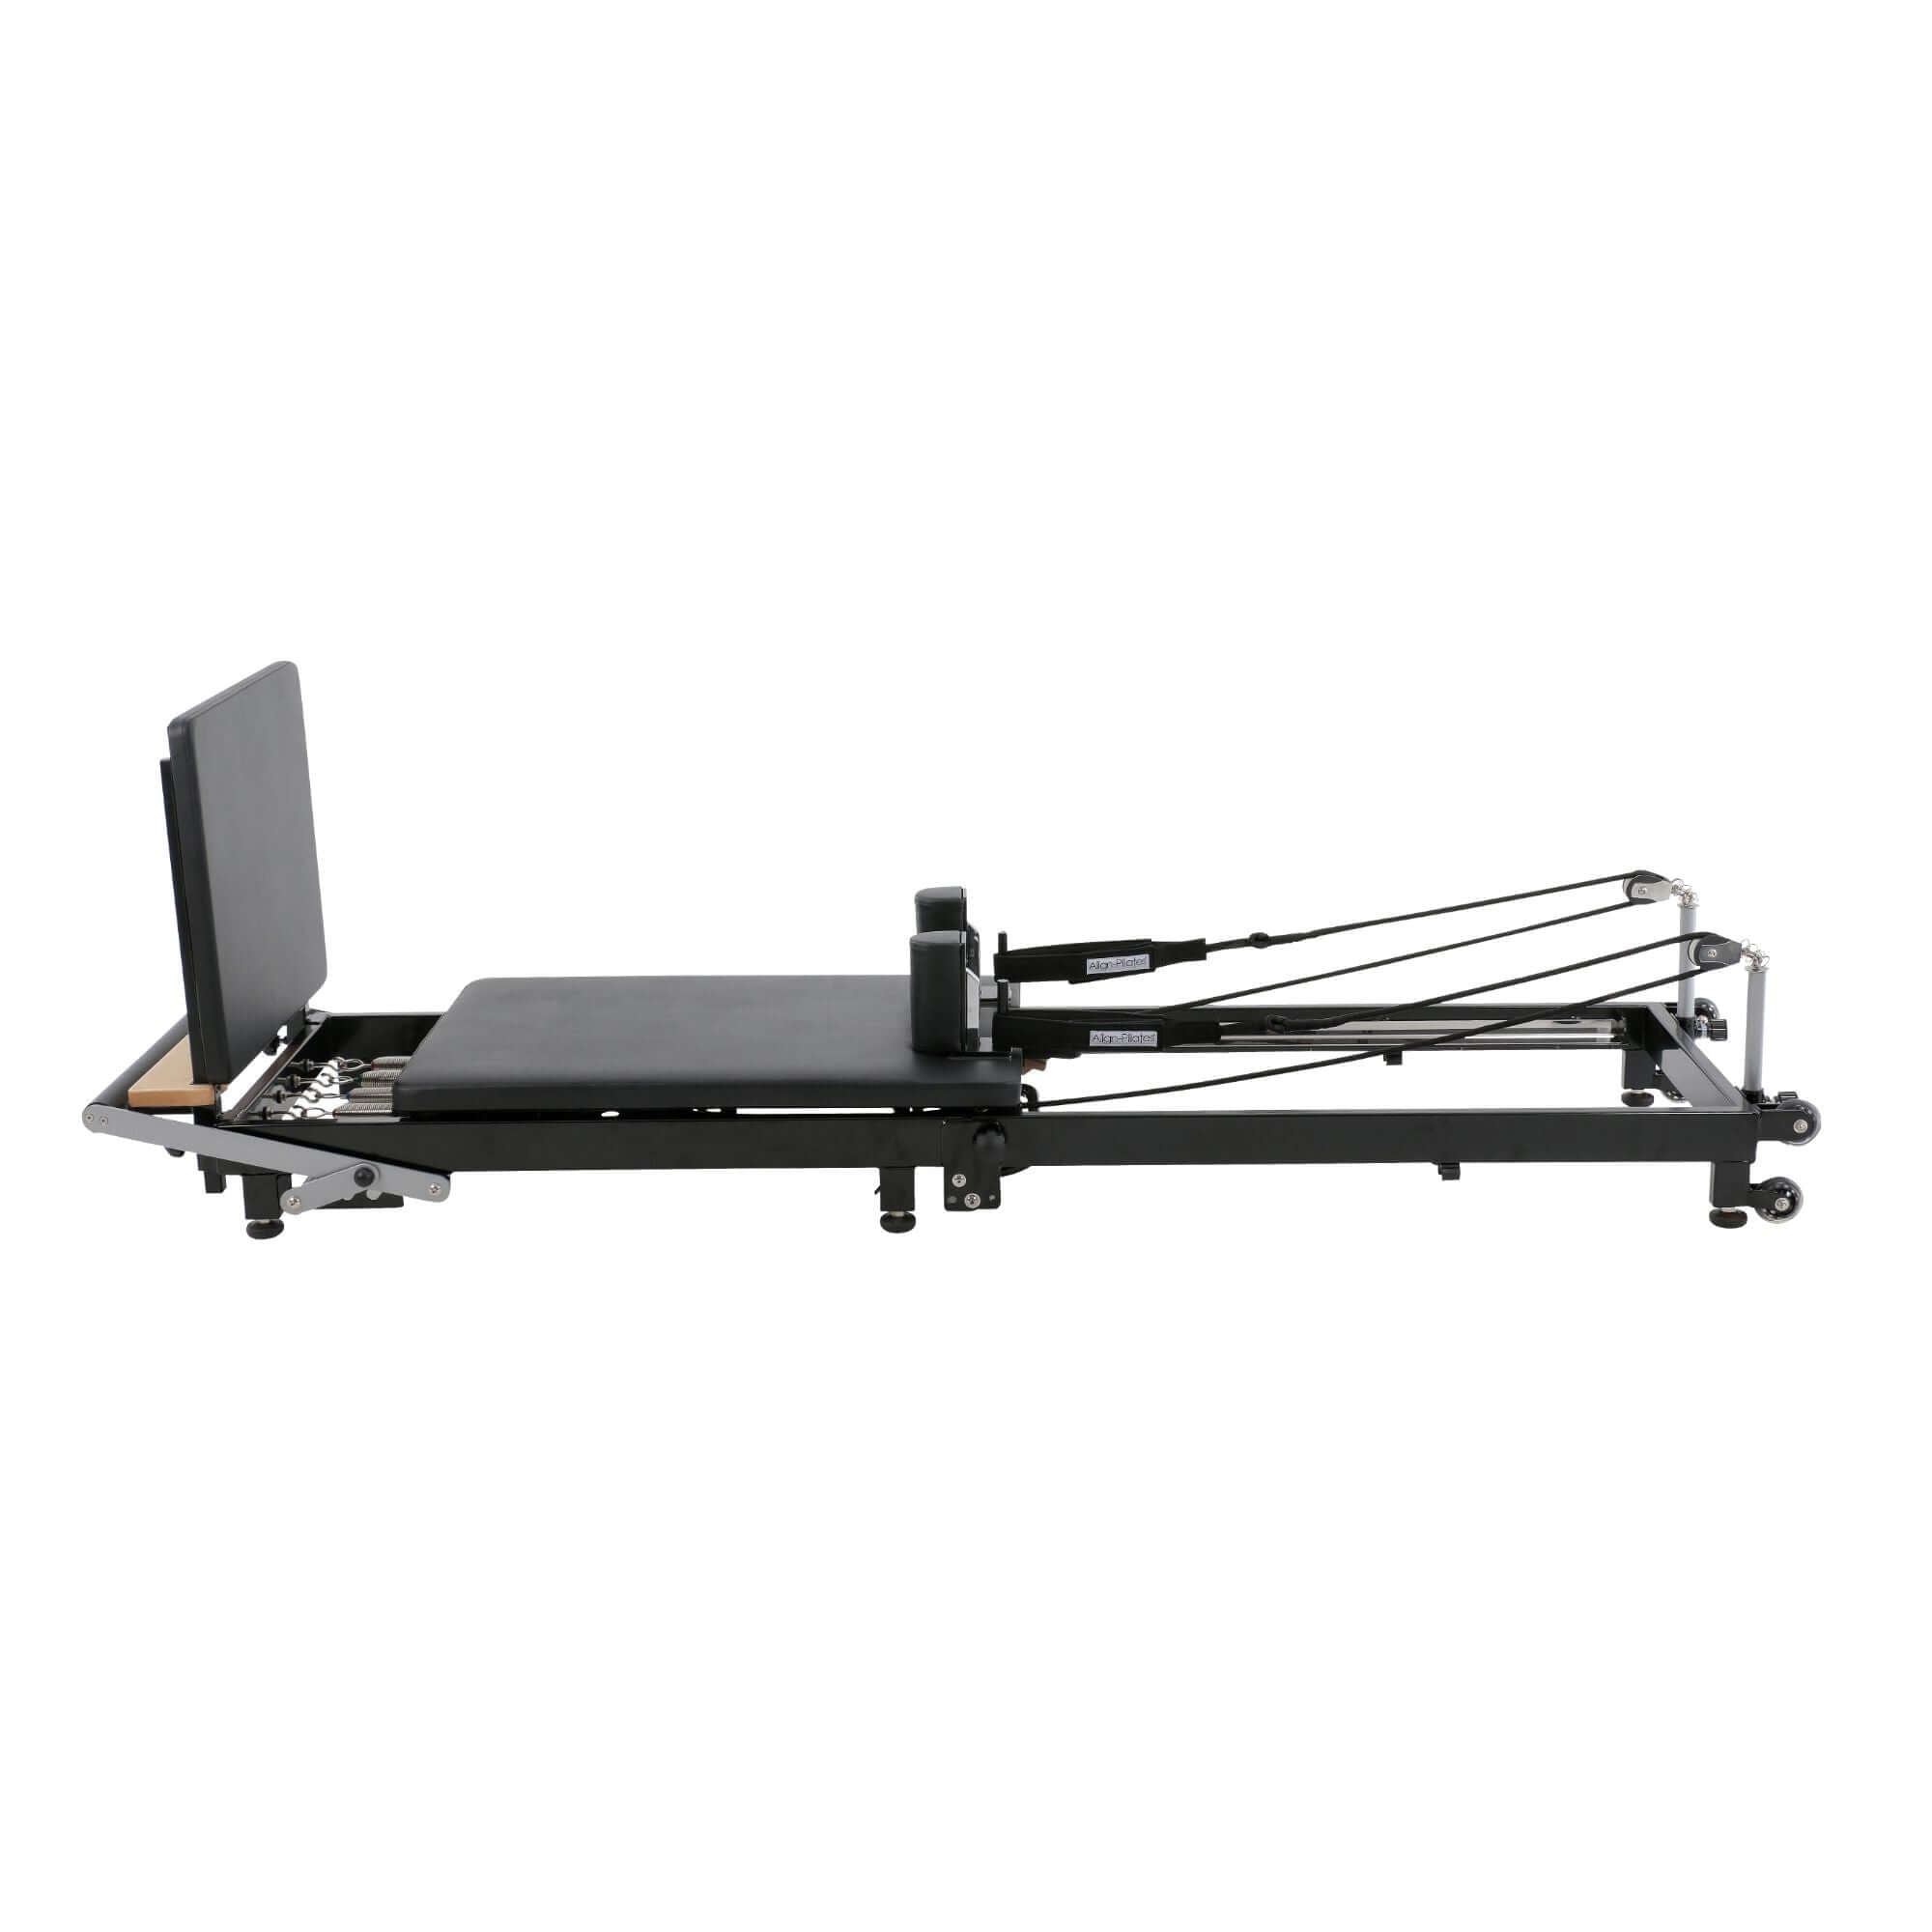 Align Pilates F2 machine with its accessories, like resistance springs and ropes, displayed for a complete workout setup.